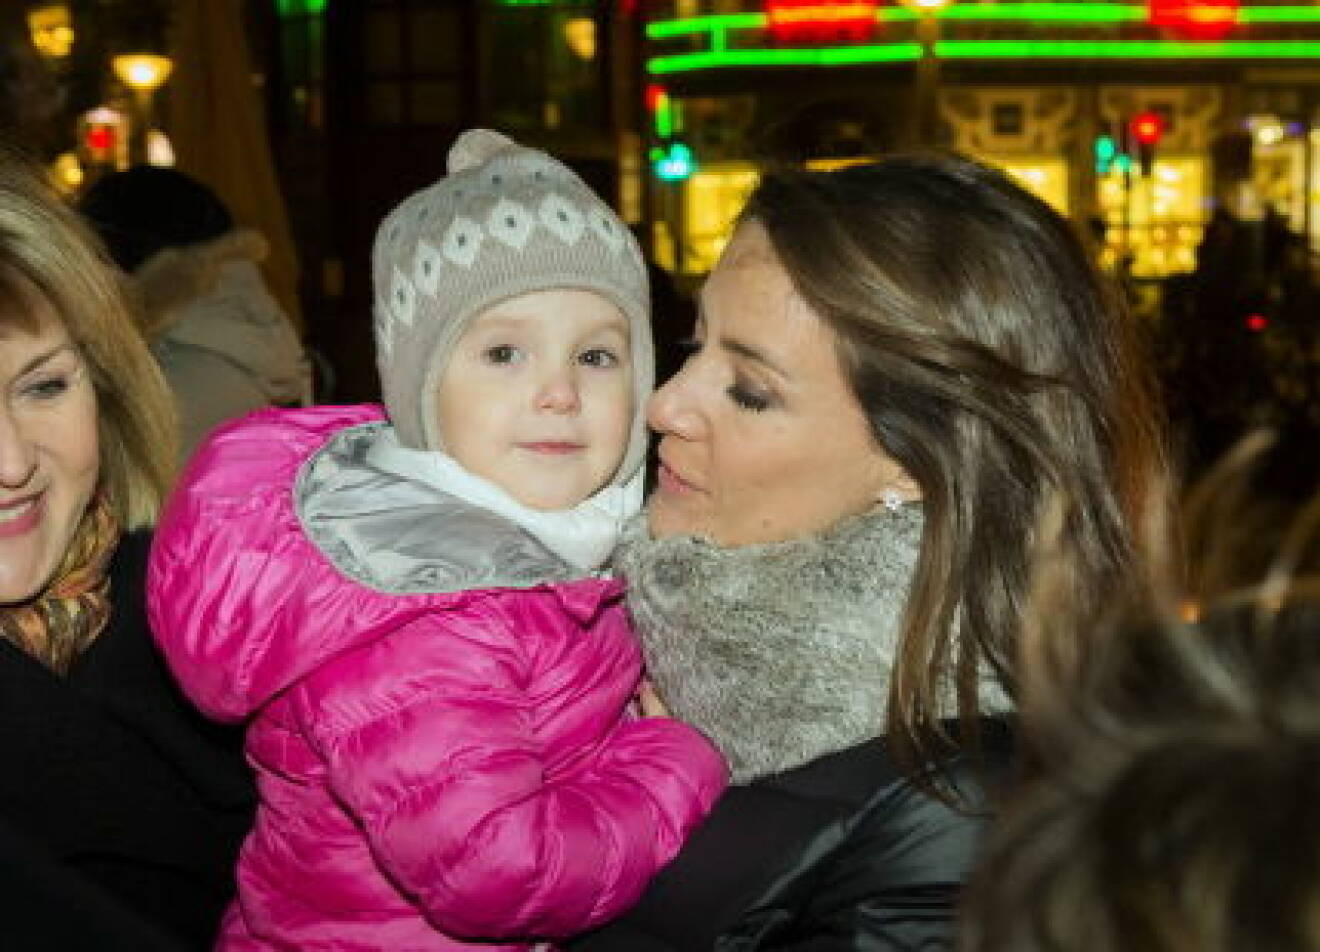 HRH Princess Marie attends World AIDS Day with her children